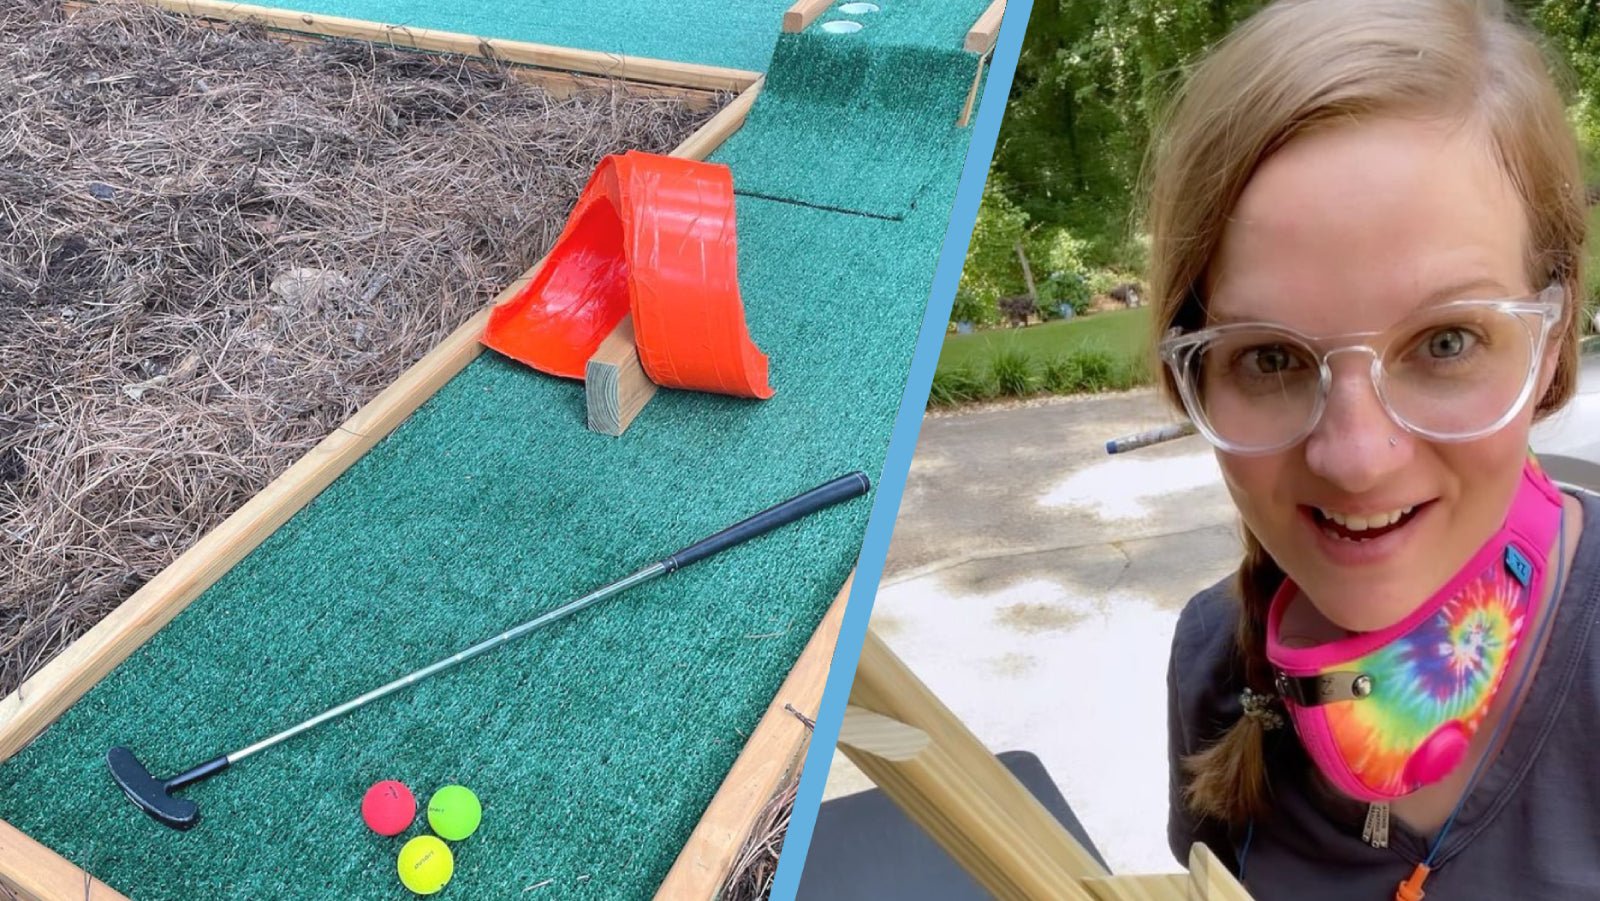 Behind the Mask: How Alex Brownfield Made a Miniature Golf Course at Home - RZ Mask